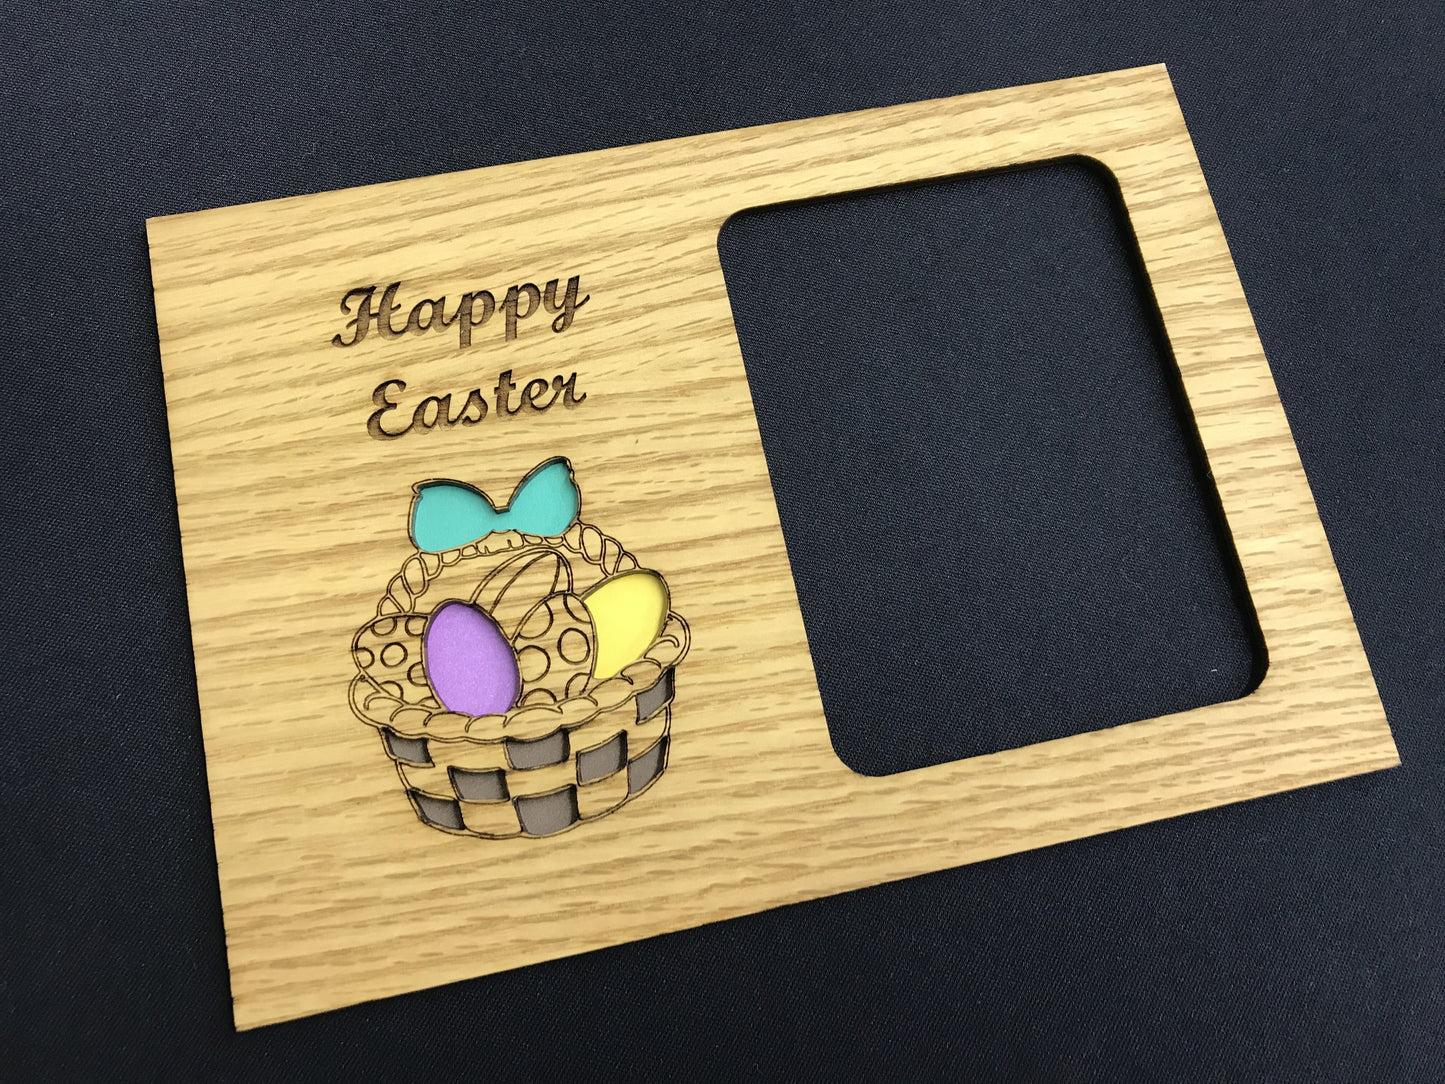 Happy Easter Picture Frame - 5x7 Frame Holds 3x4 Photo